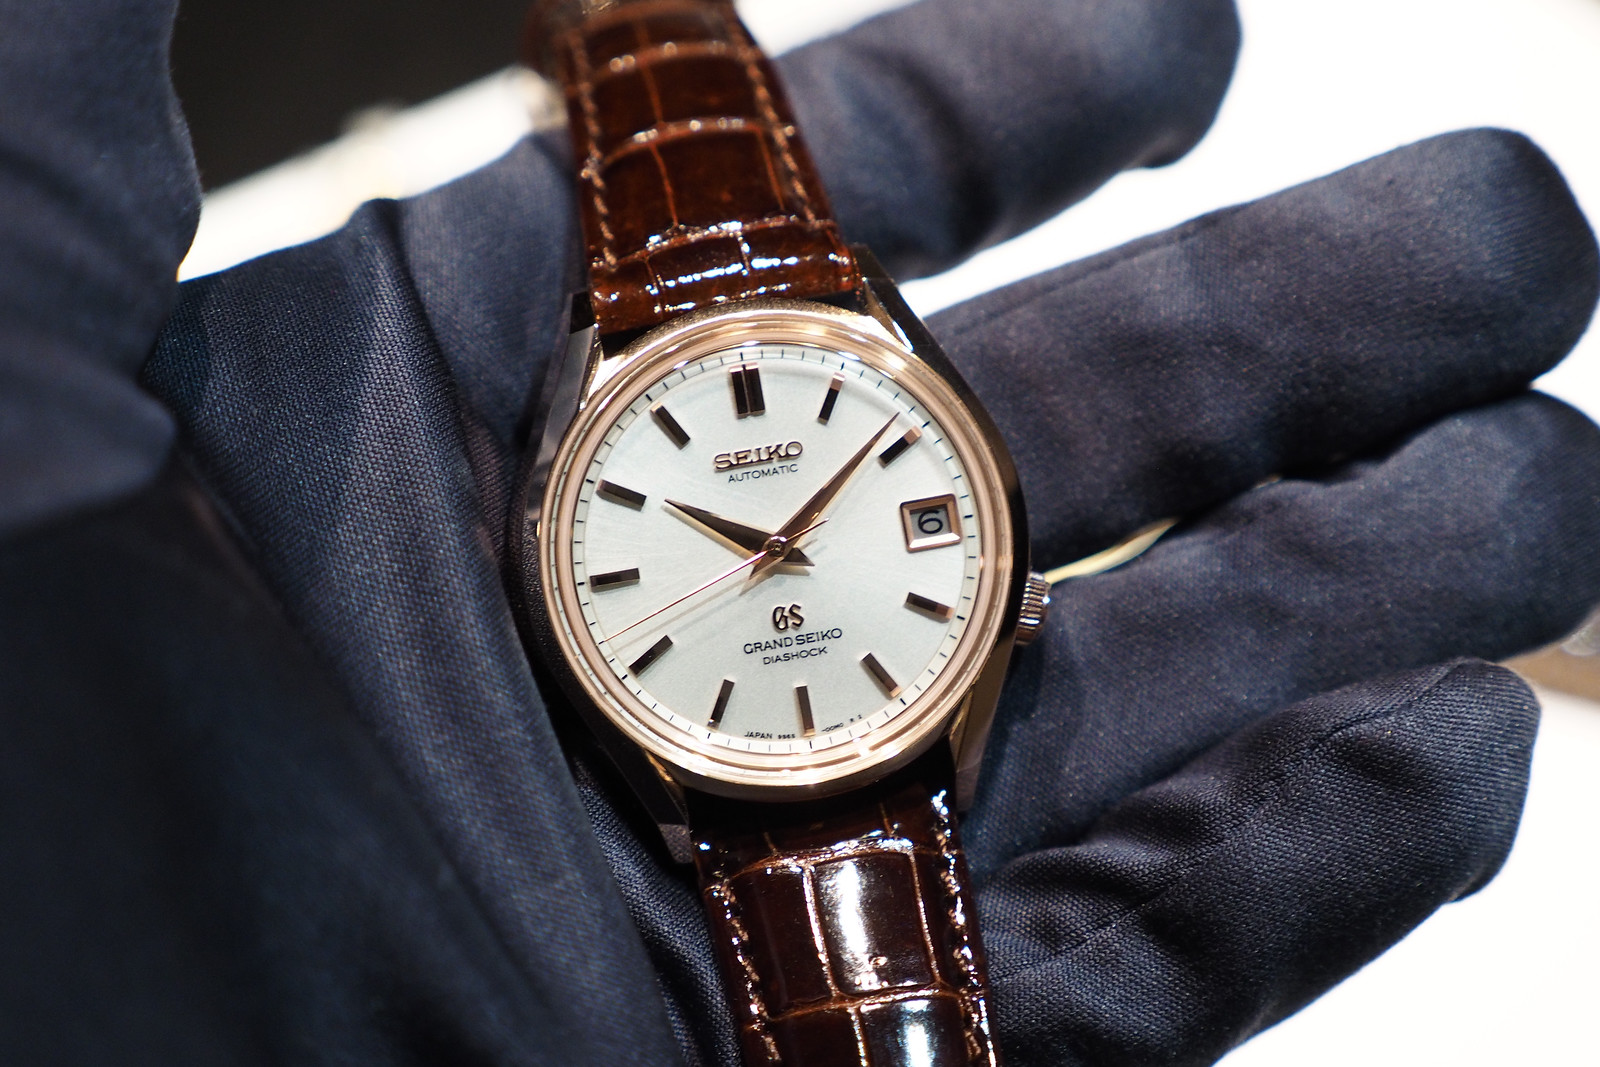 BASELWORLD: The Grand Seiko 62GS Hands-On